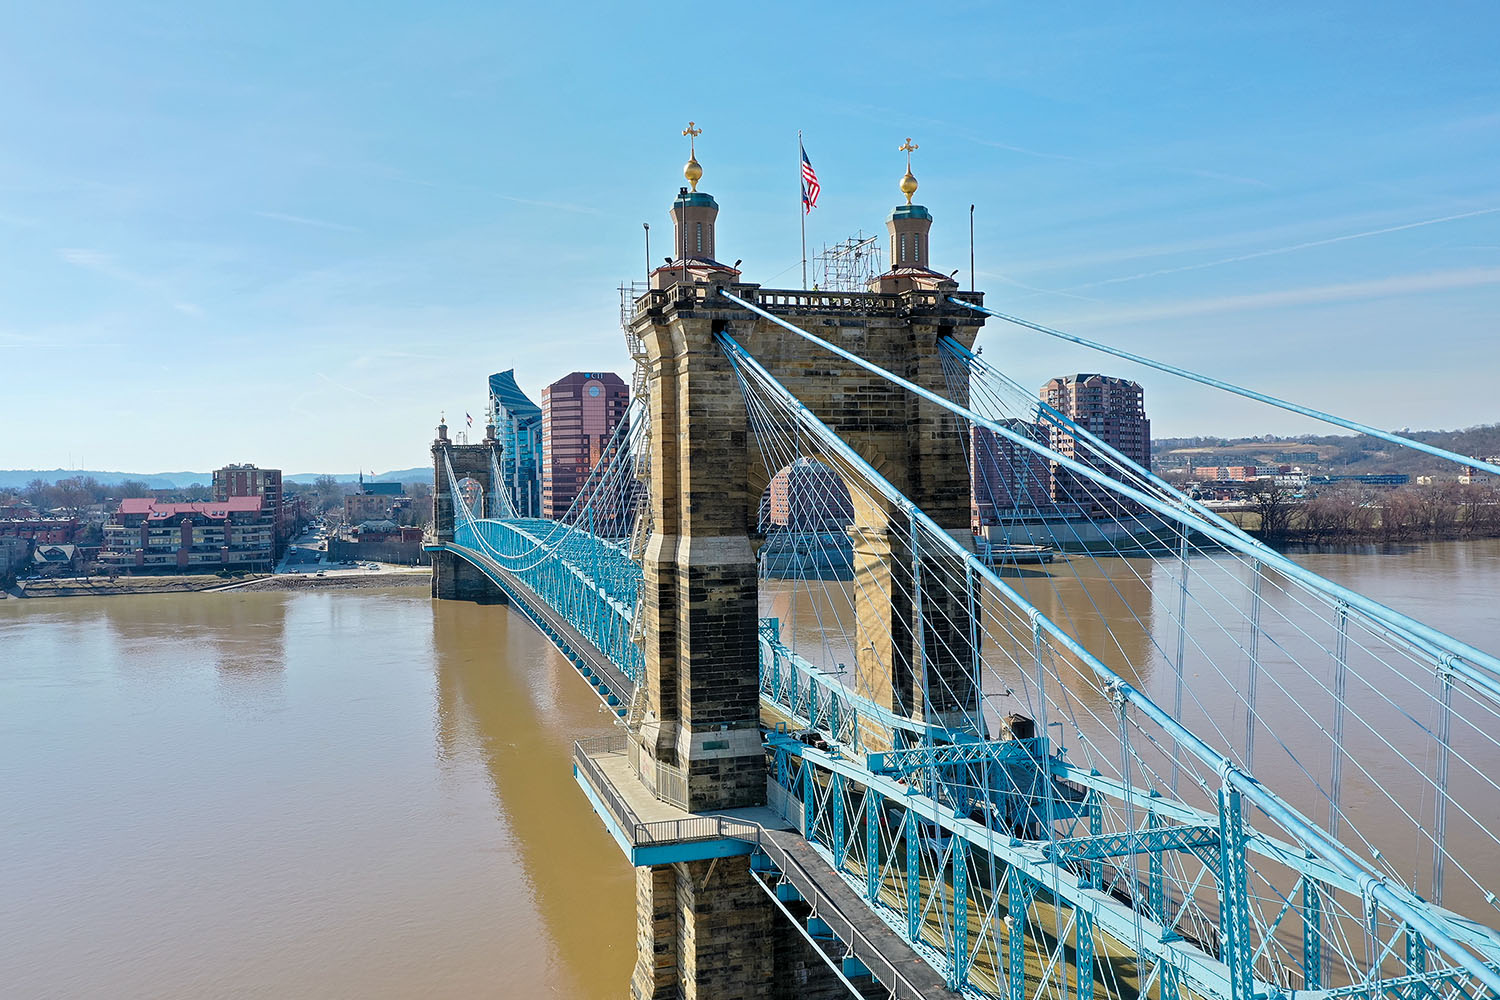 The John A. Roebling Bridge, a suspension bridge crossing the Ohio River between Cincinnati, Ohio, and Covington, Ky., opened in 1867. It is expected to reopen this spring following completion of repairs that have kept it closed to vehicle traffic for more than a year. (Photo by Nancy Wood/Kentucky Transportation Cabinet)